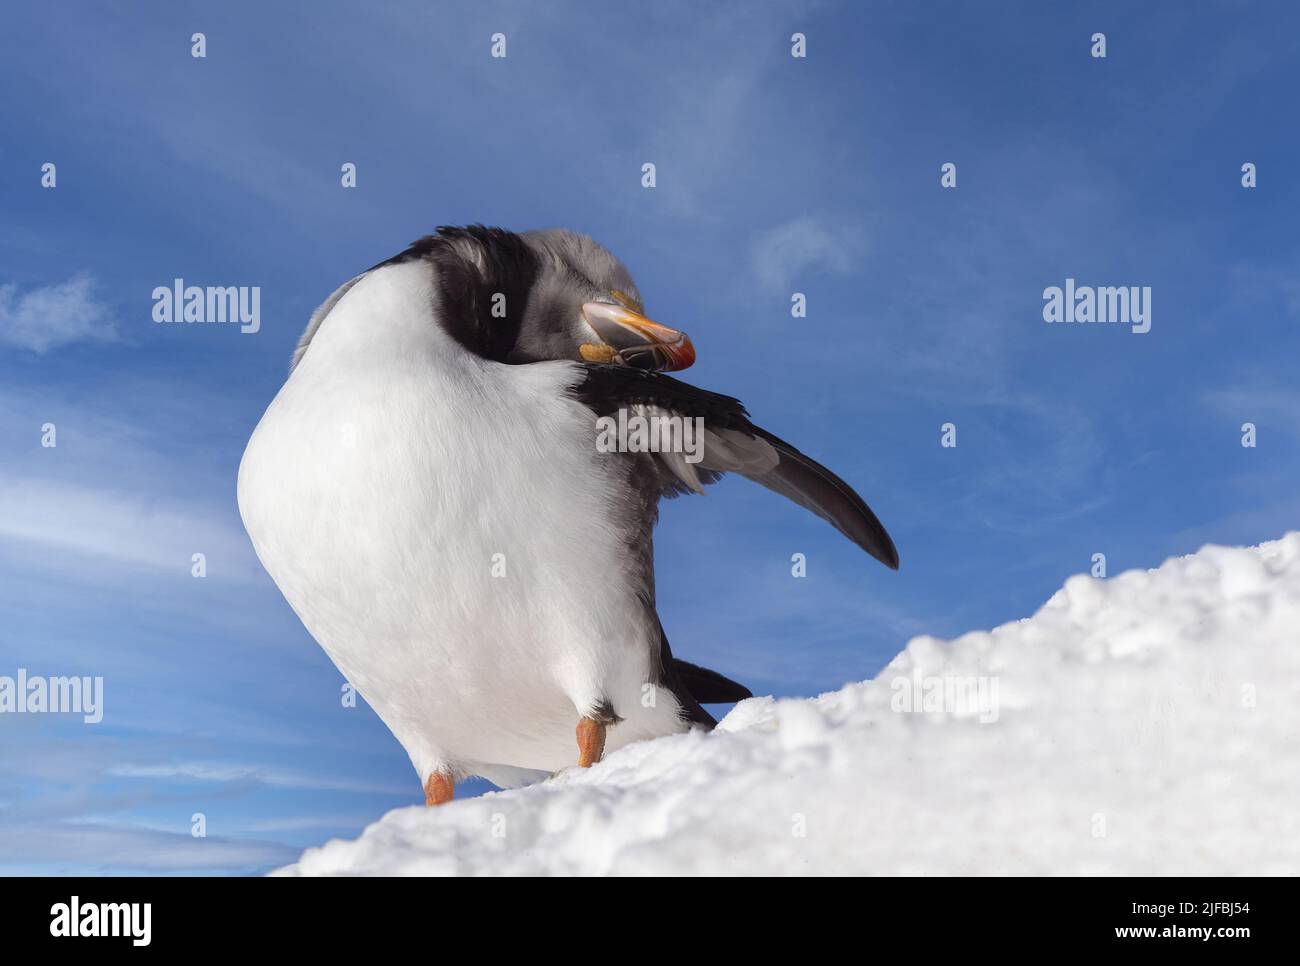 Norway, Varanger Fjord, Vardø or Vardo, Island of Hornøya, protected island with large colonies of seabirds, Atlantic Puffin (Fratercula arctica), in the snow Stock Photo